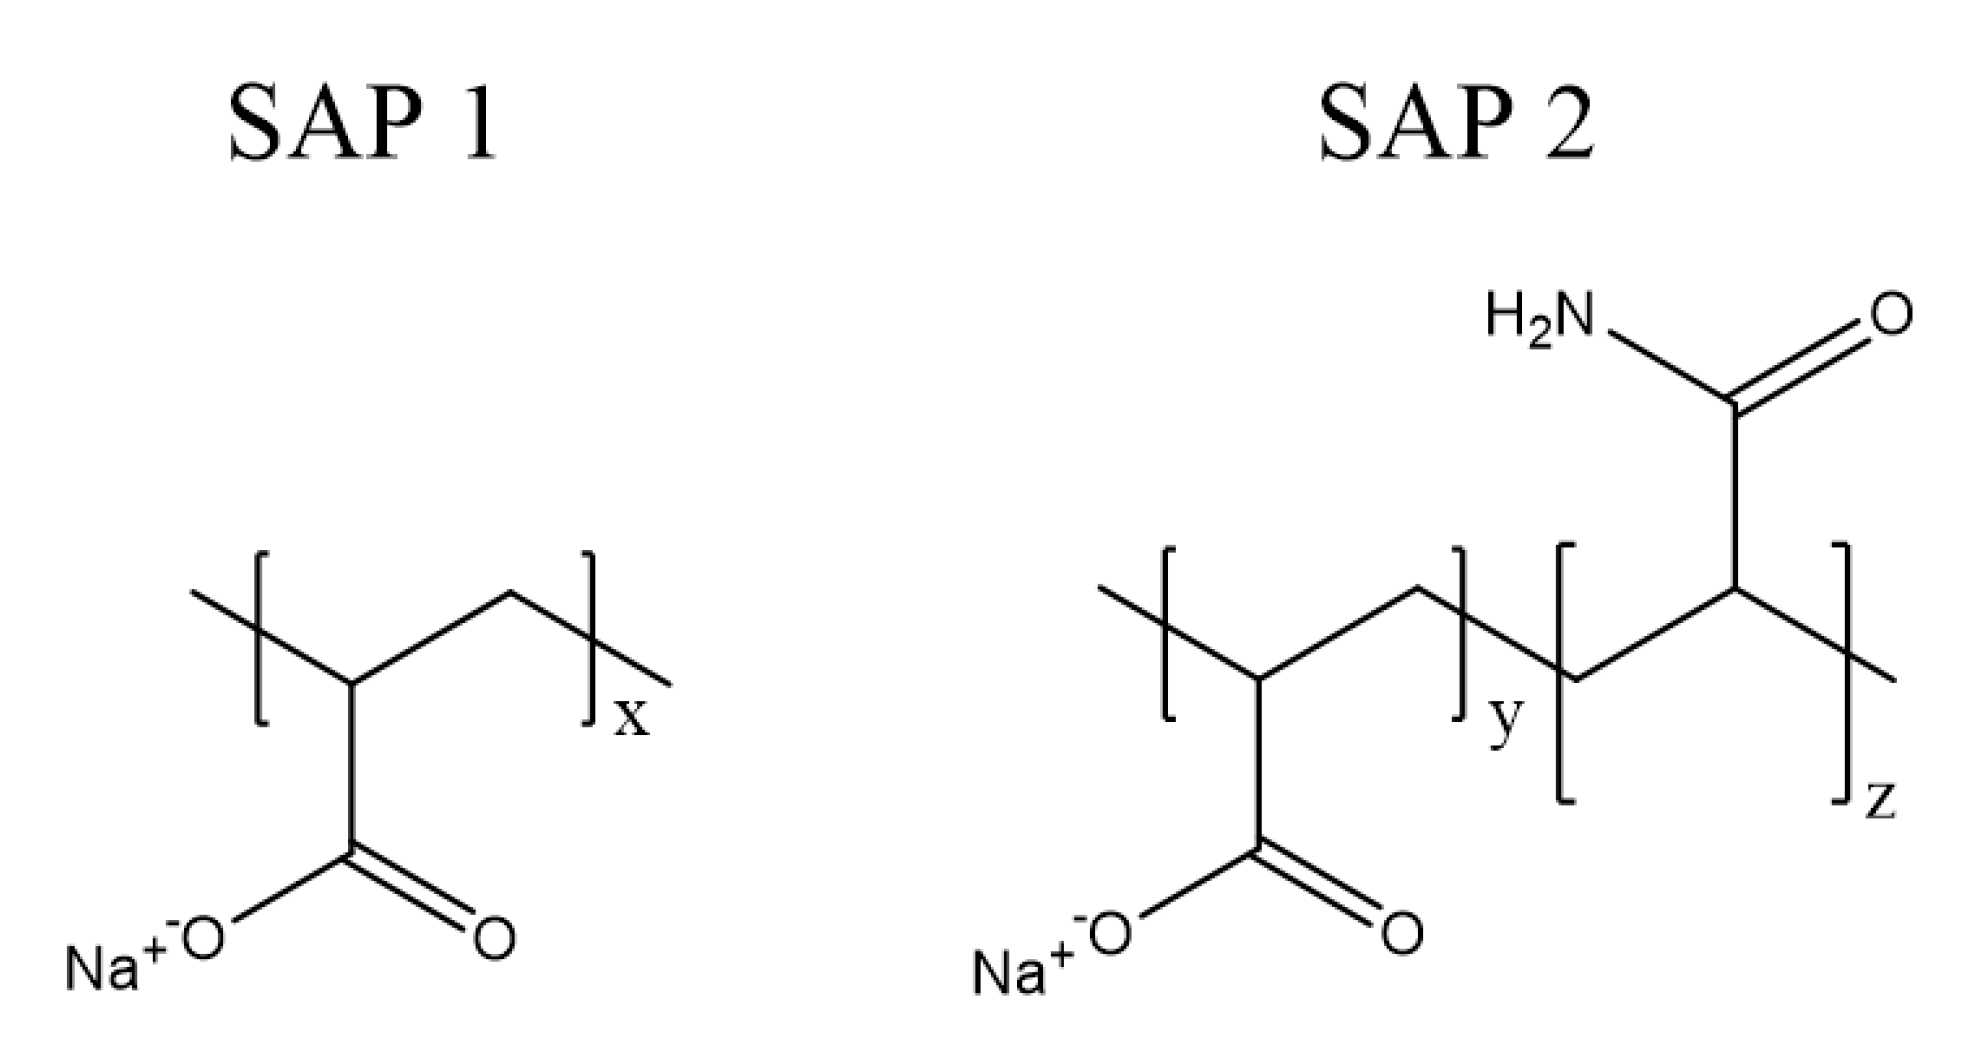 Chemical structure of superabsorbent polymer and its reaction with water.